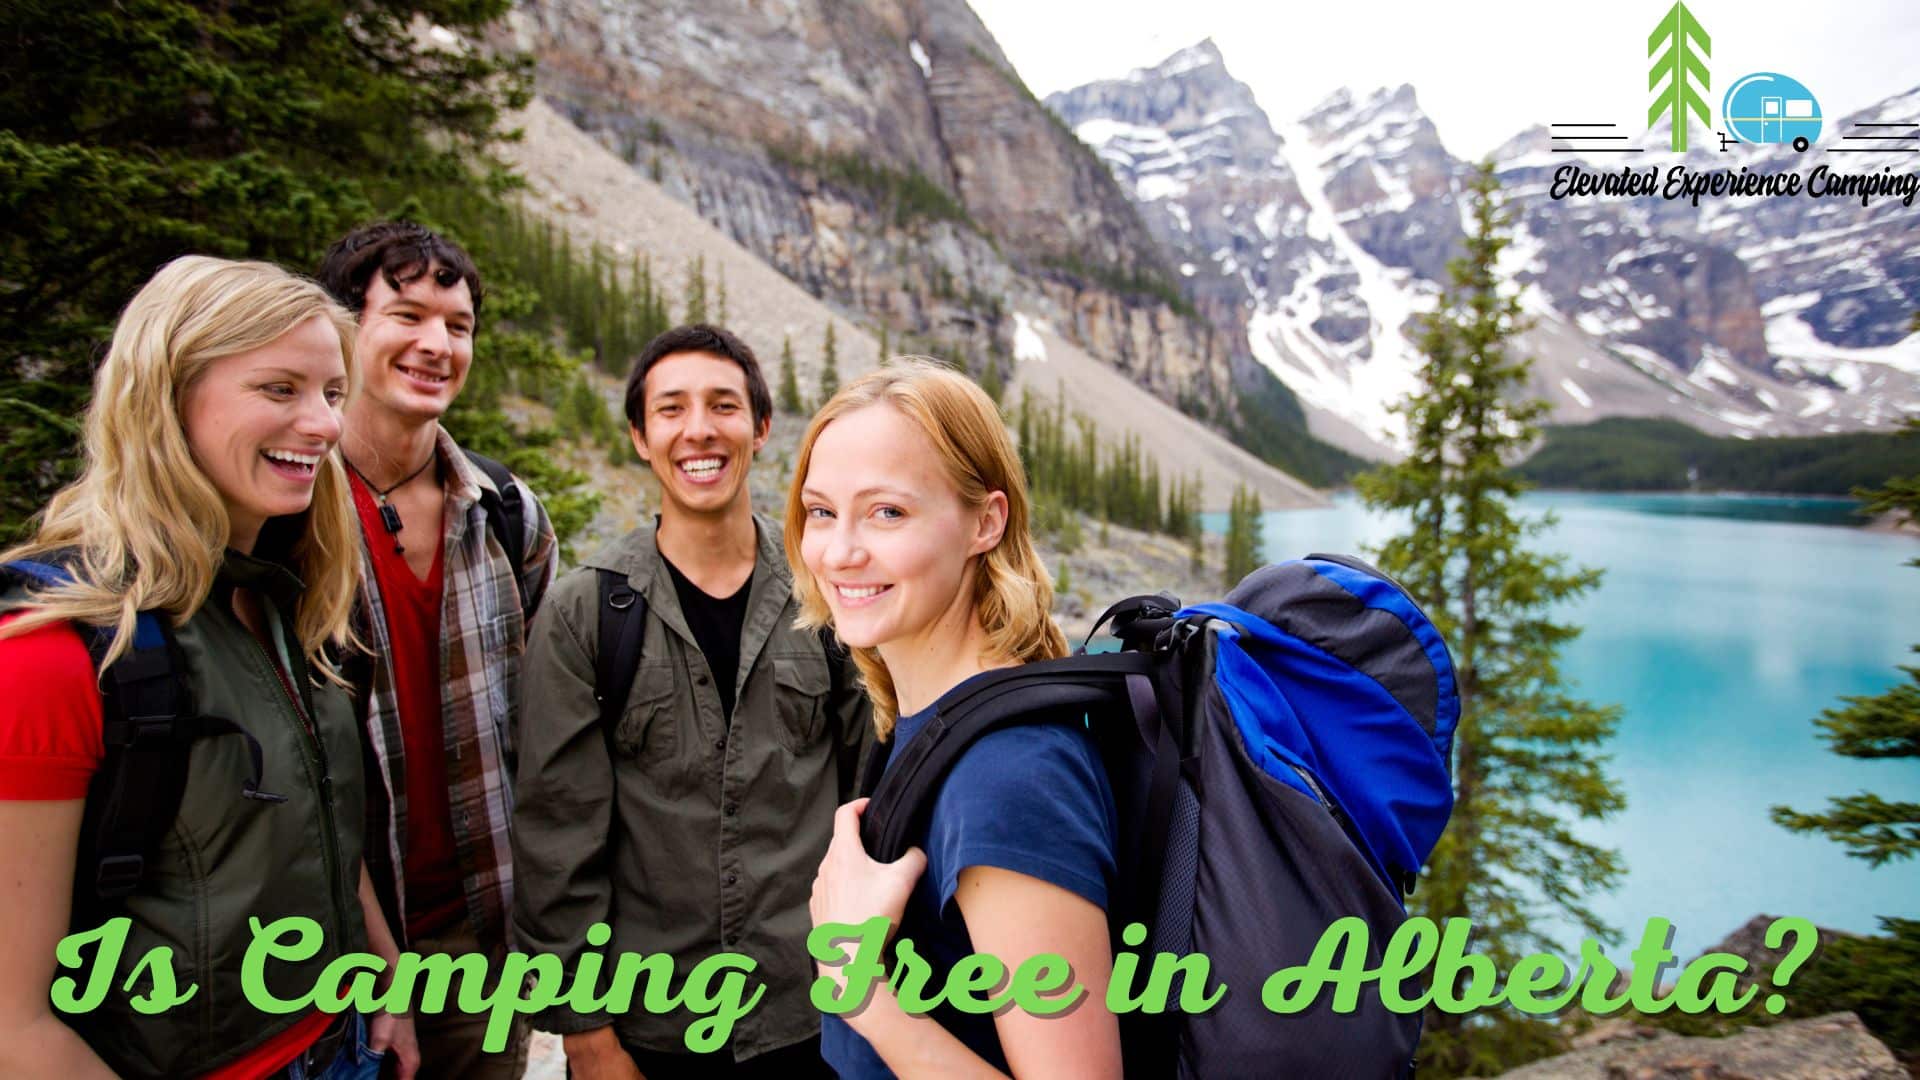 Is Camping Free in Alberta by Elevated Experience Camping